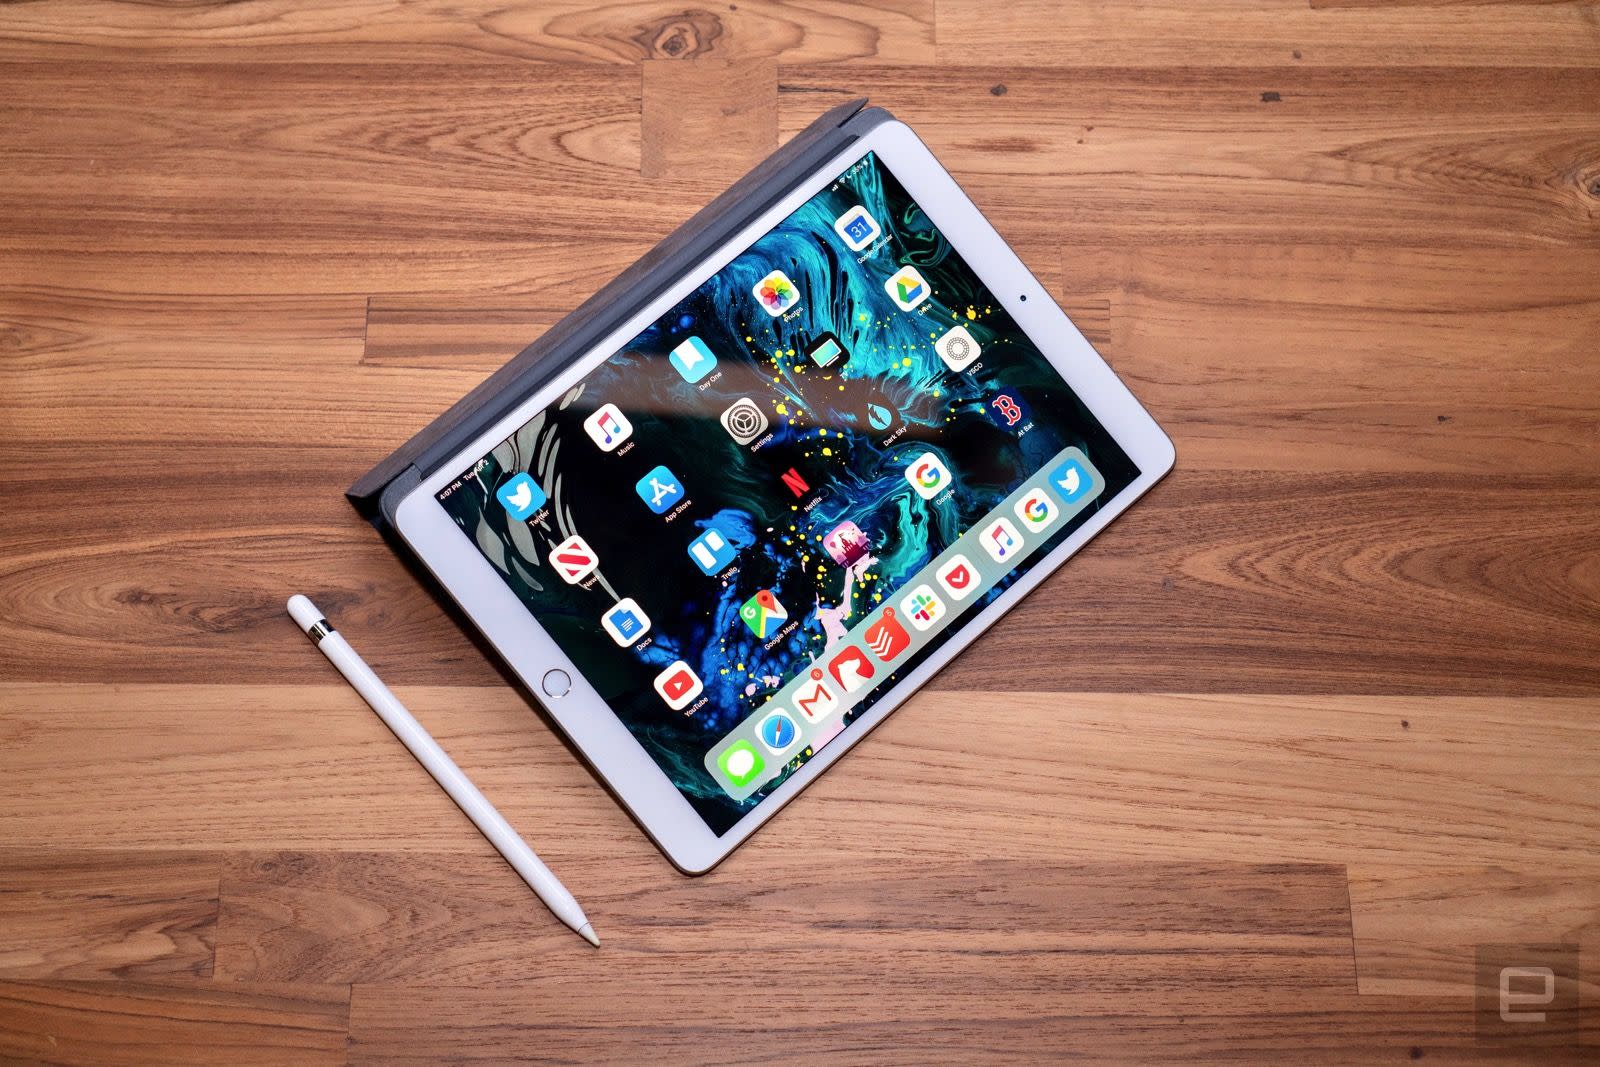 Apple's 256GB iPad Air is on sale for 549